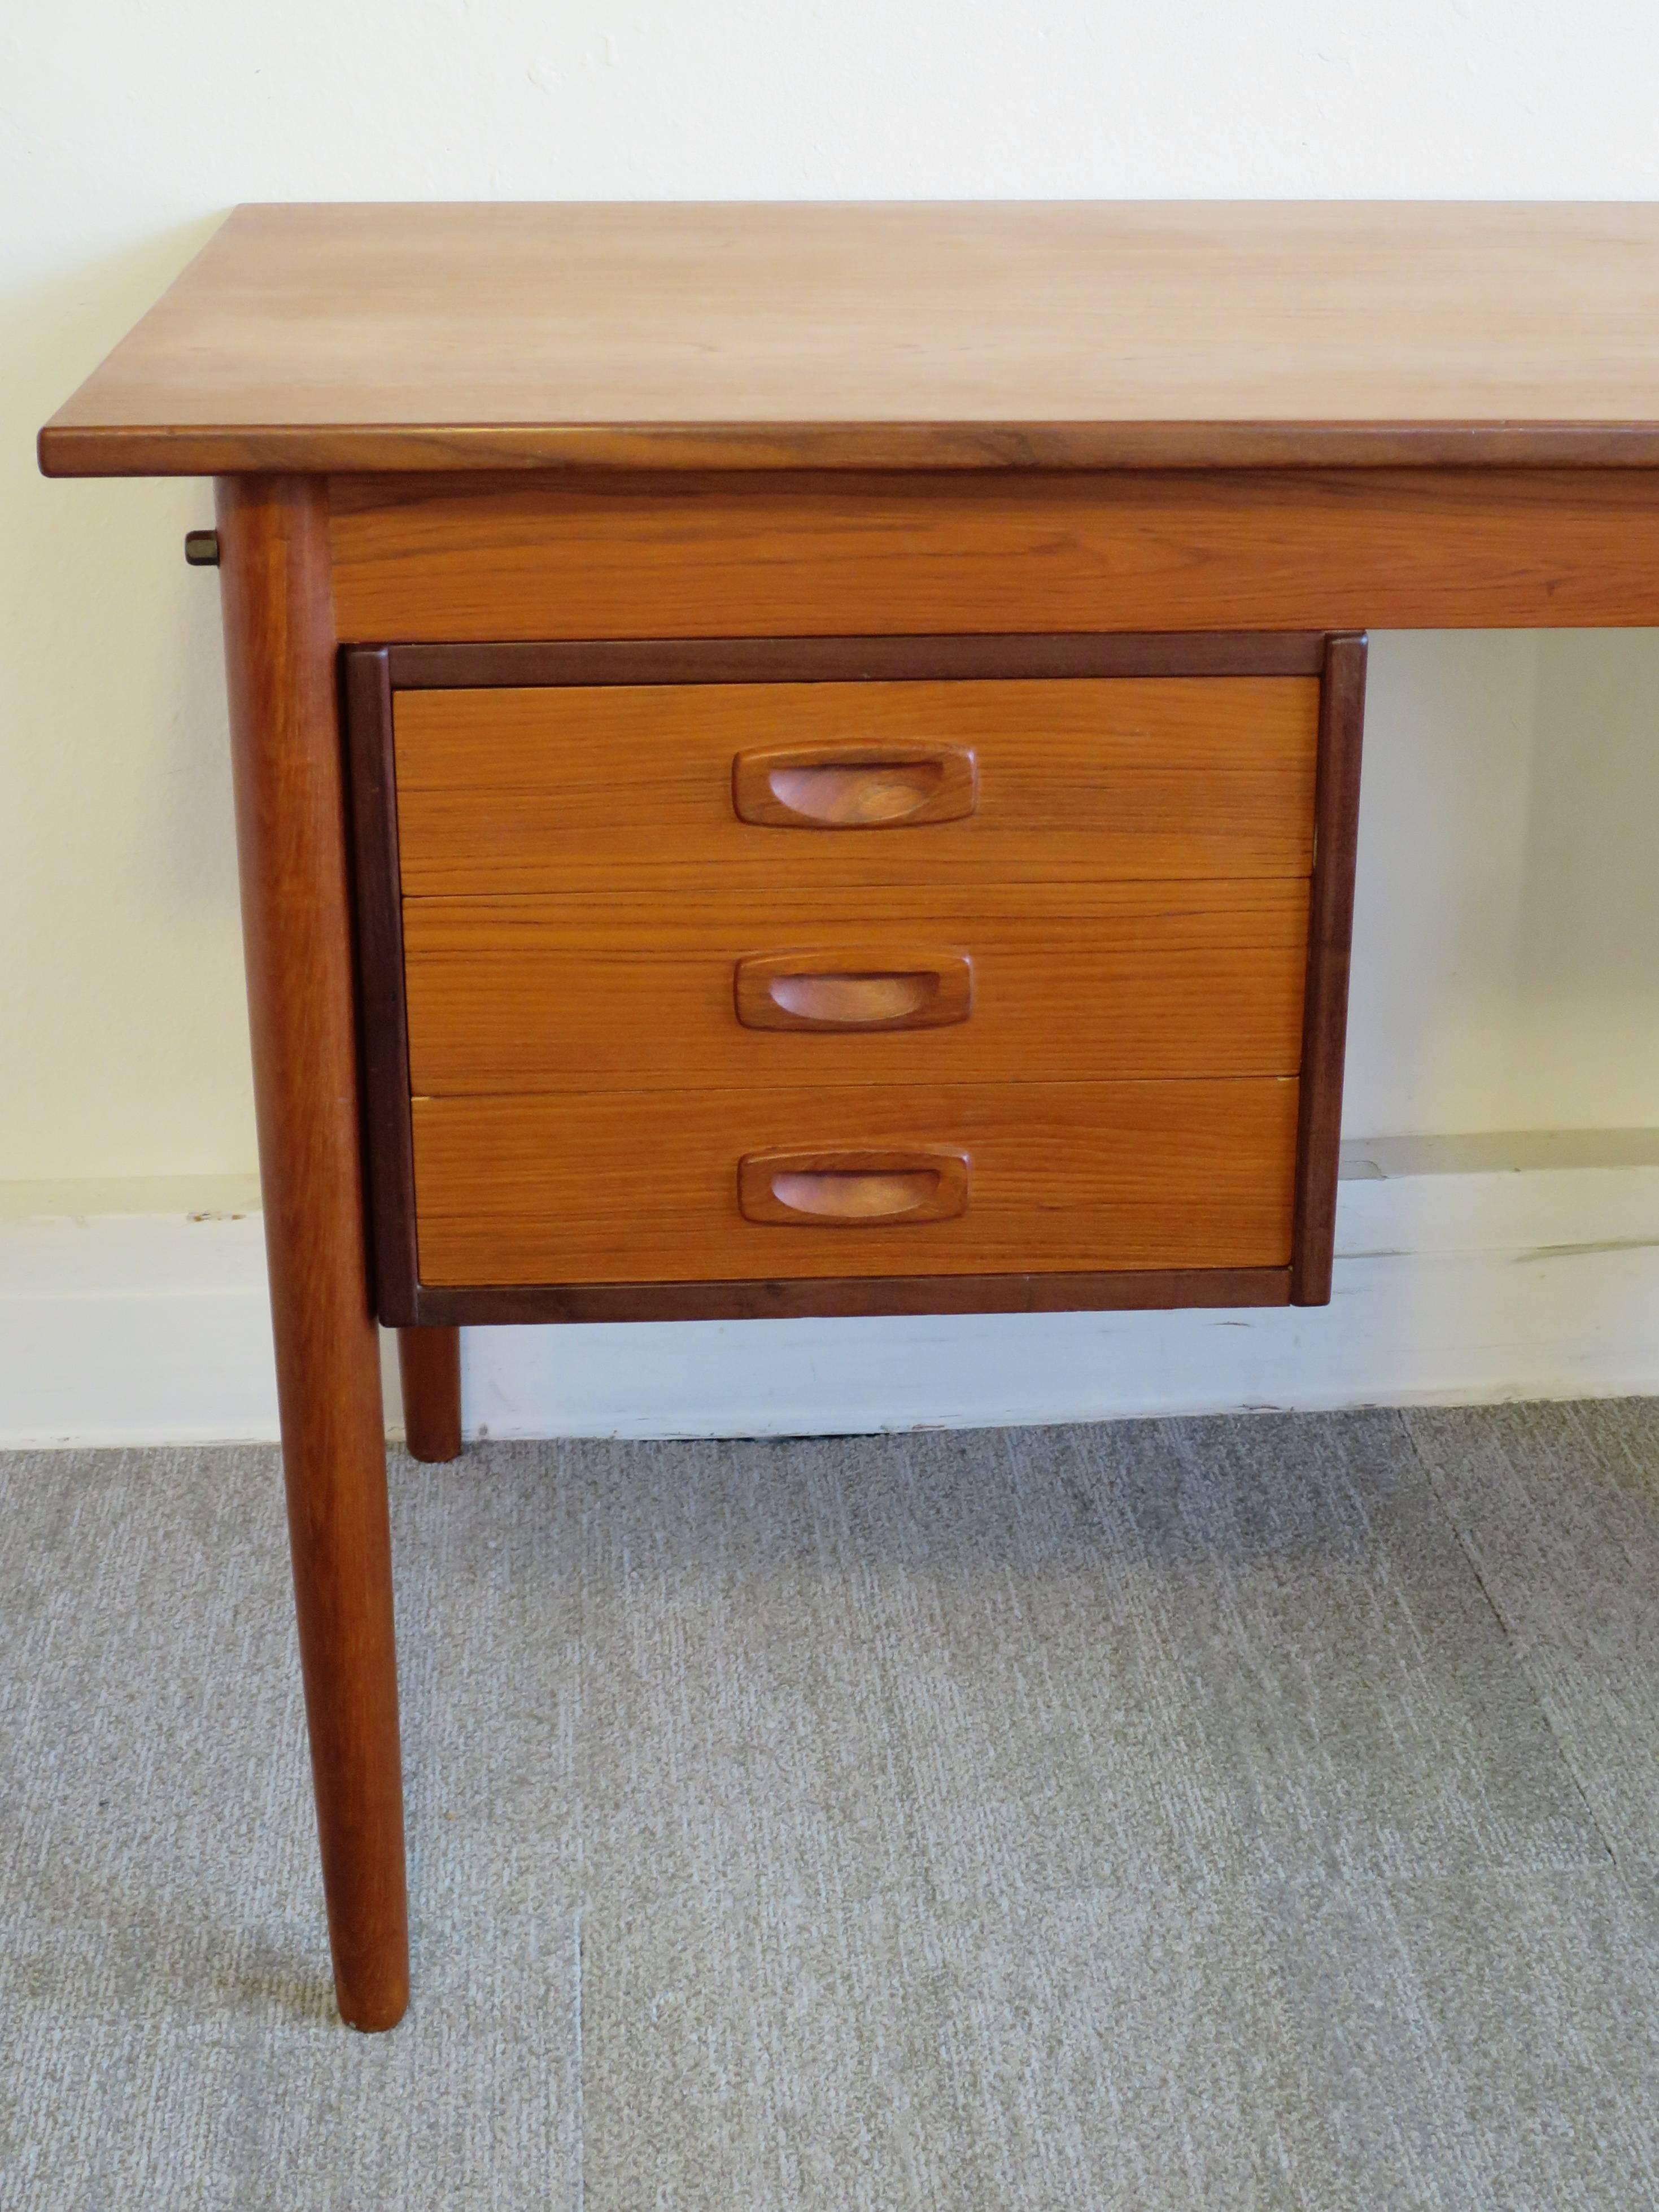 Danish Modern teak desk by Arne Vodder. Has a drop-leaf and finished back with storage. The three drawers can be shifted from left to right. When open the leaf adds 16